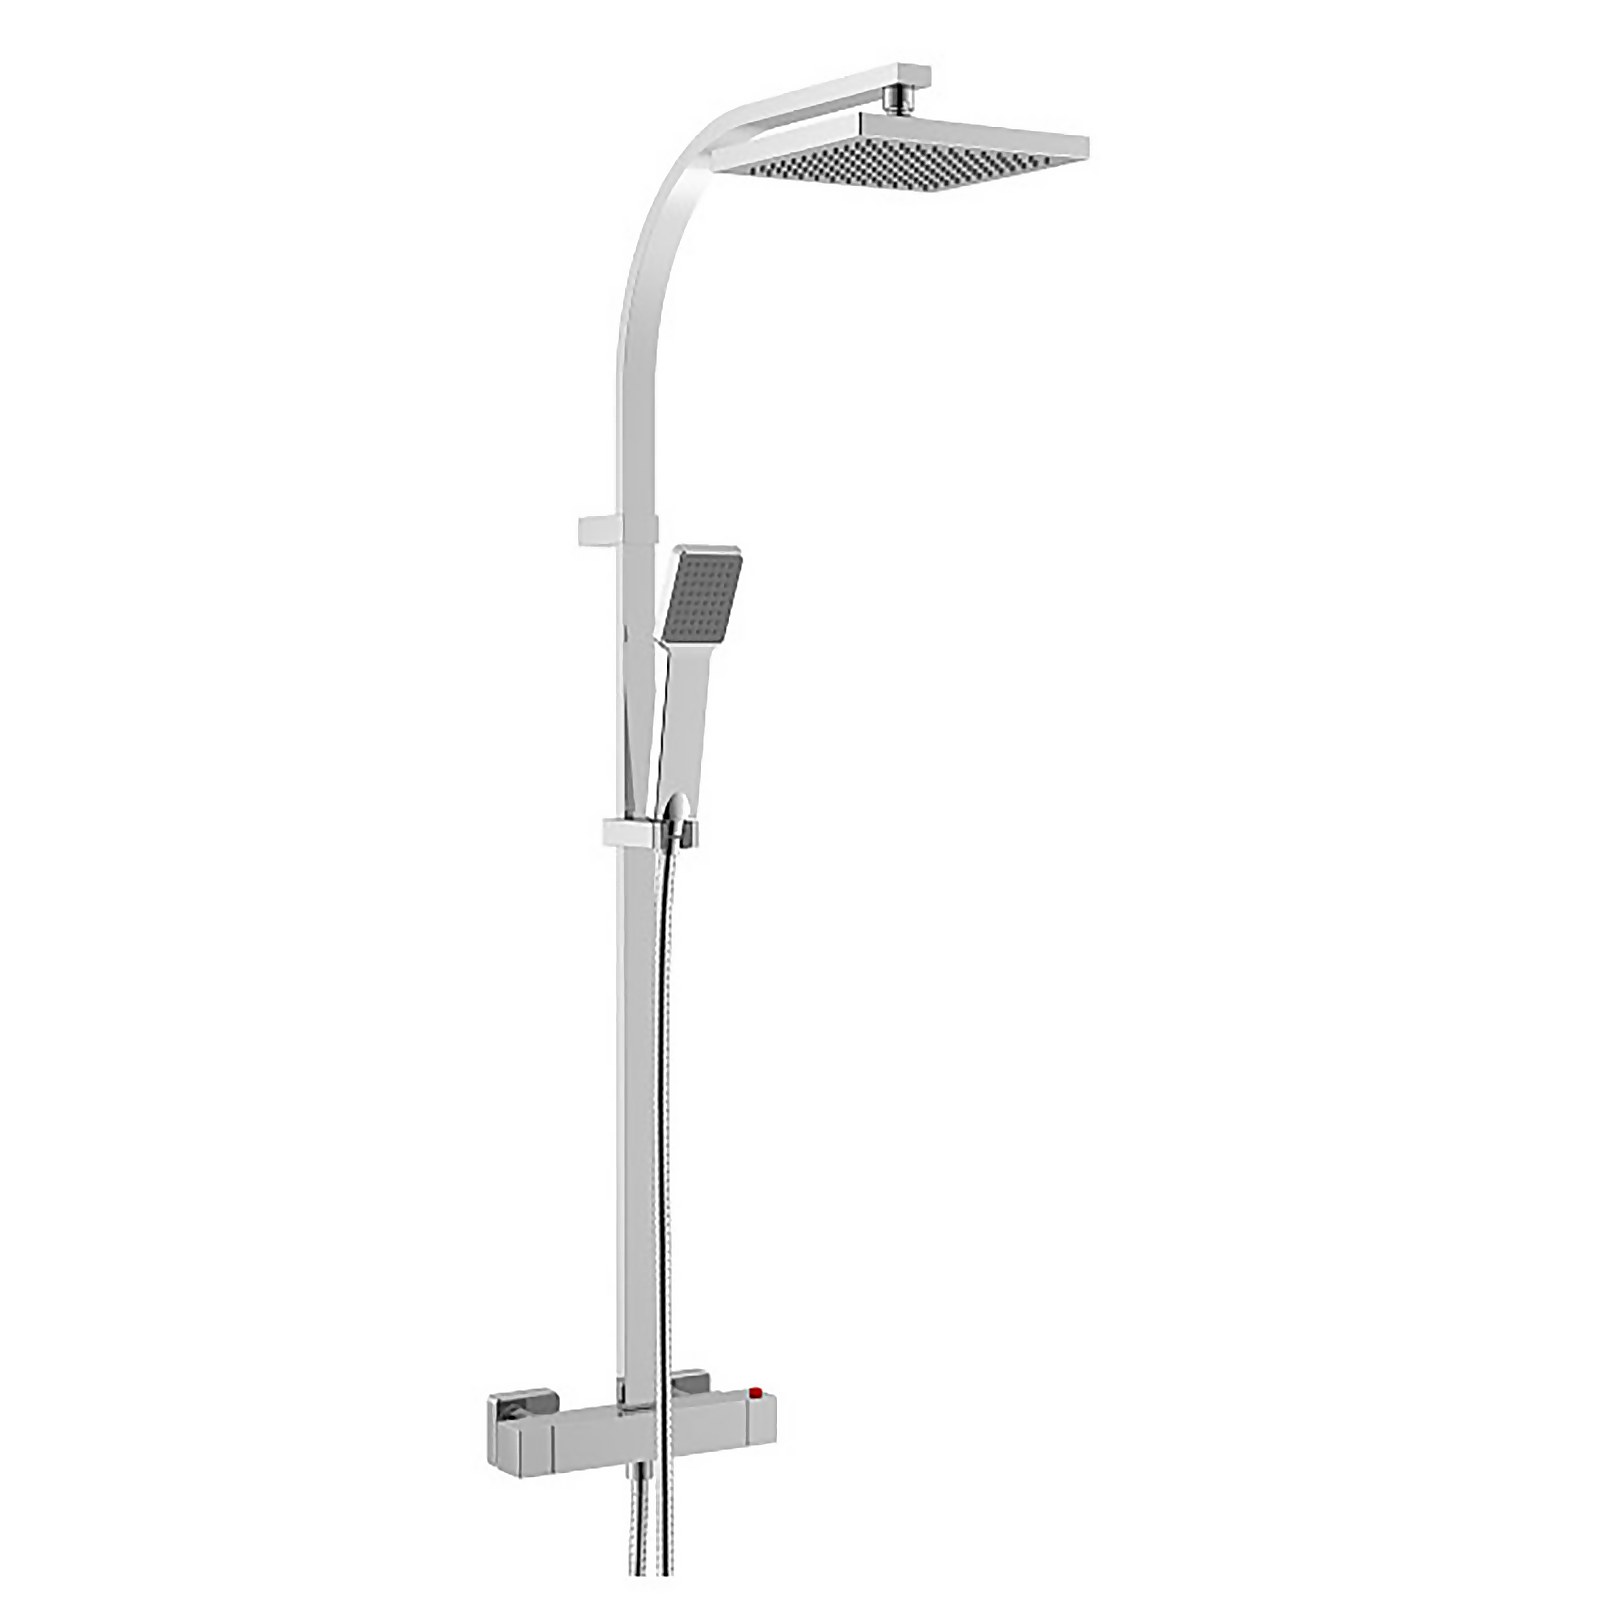 Photo of Bathstore Blade Thermostatic Mixer Shower